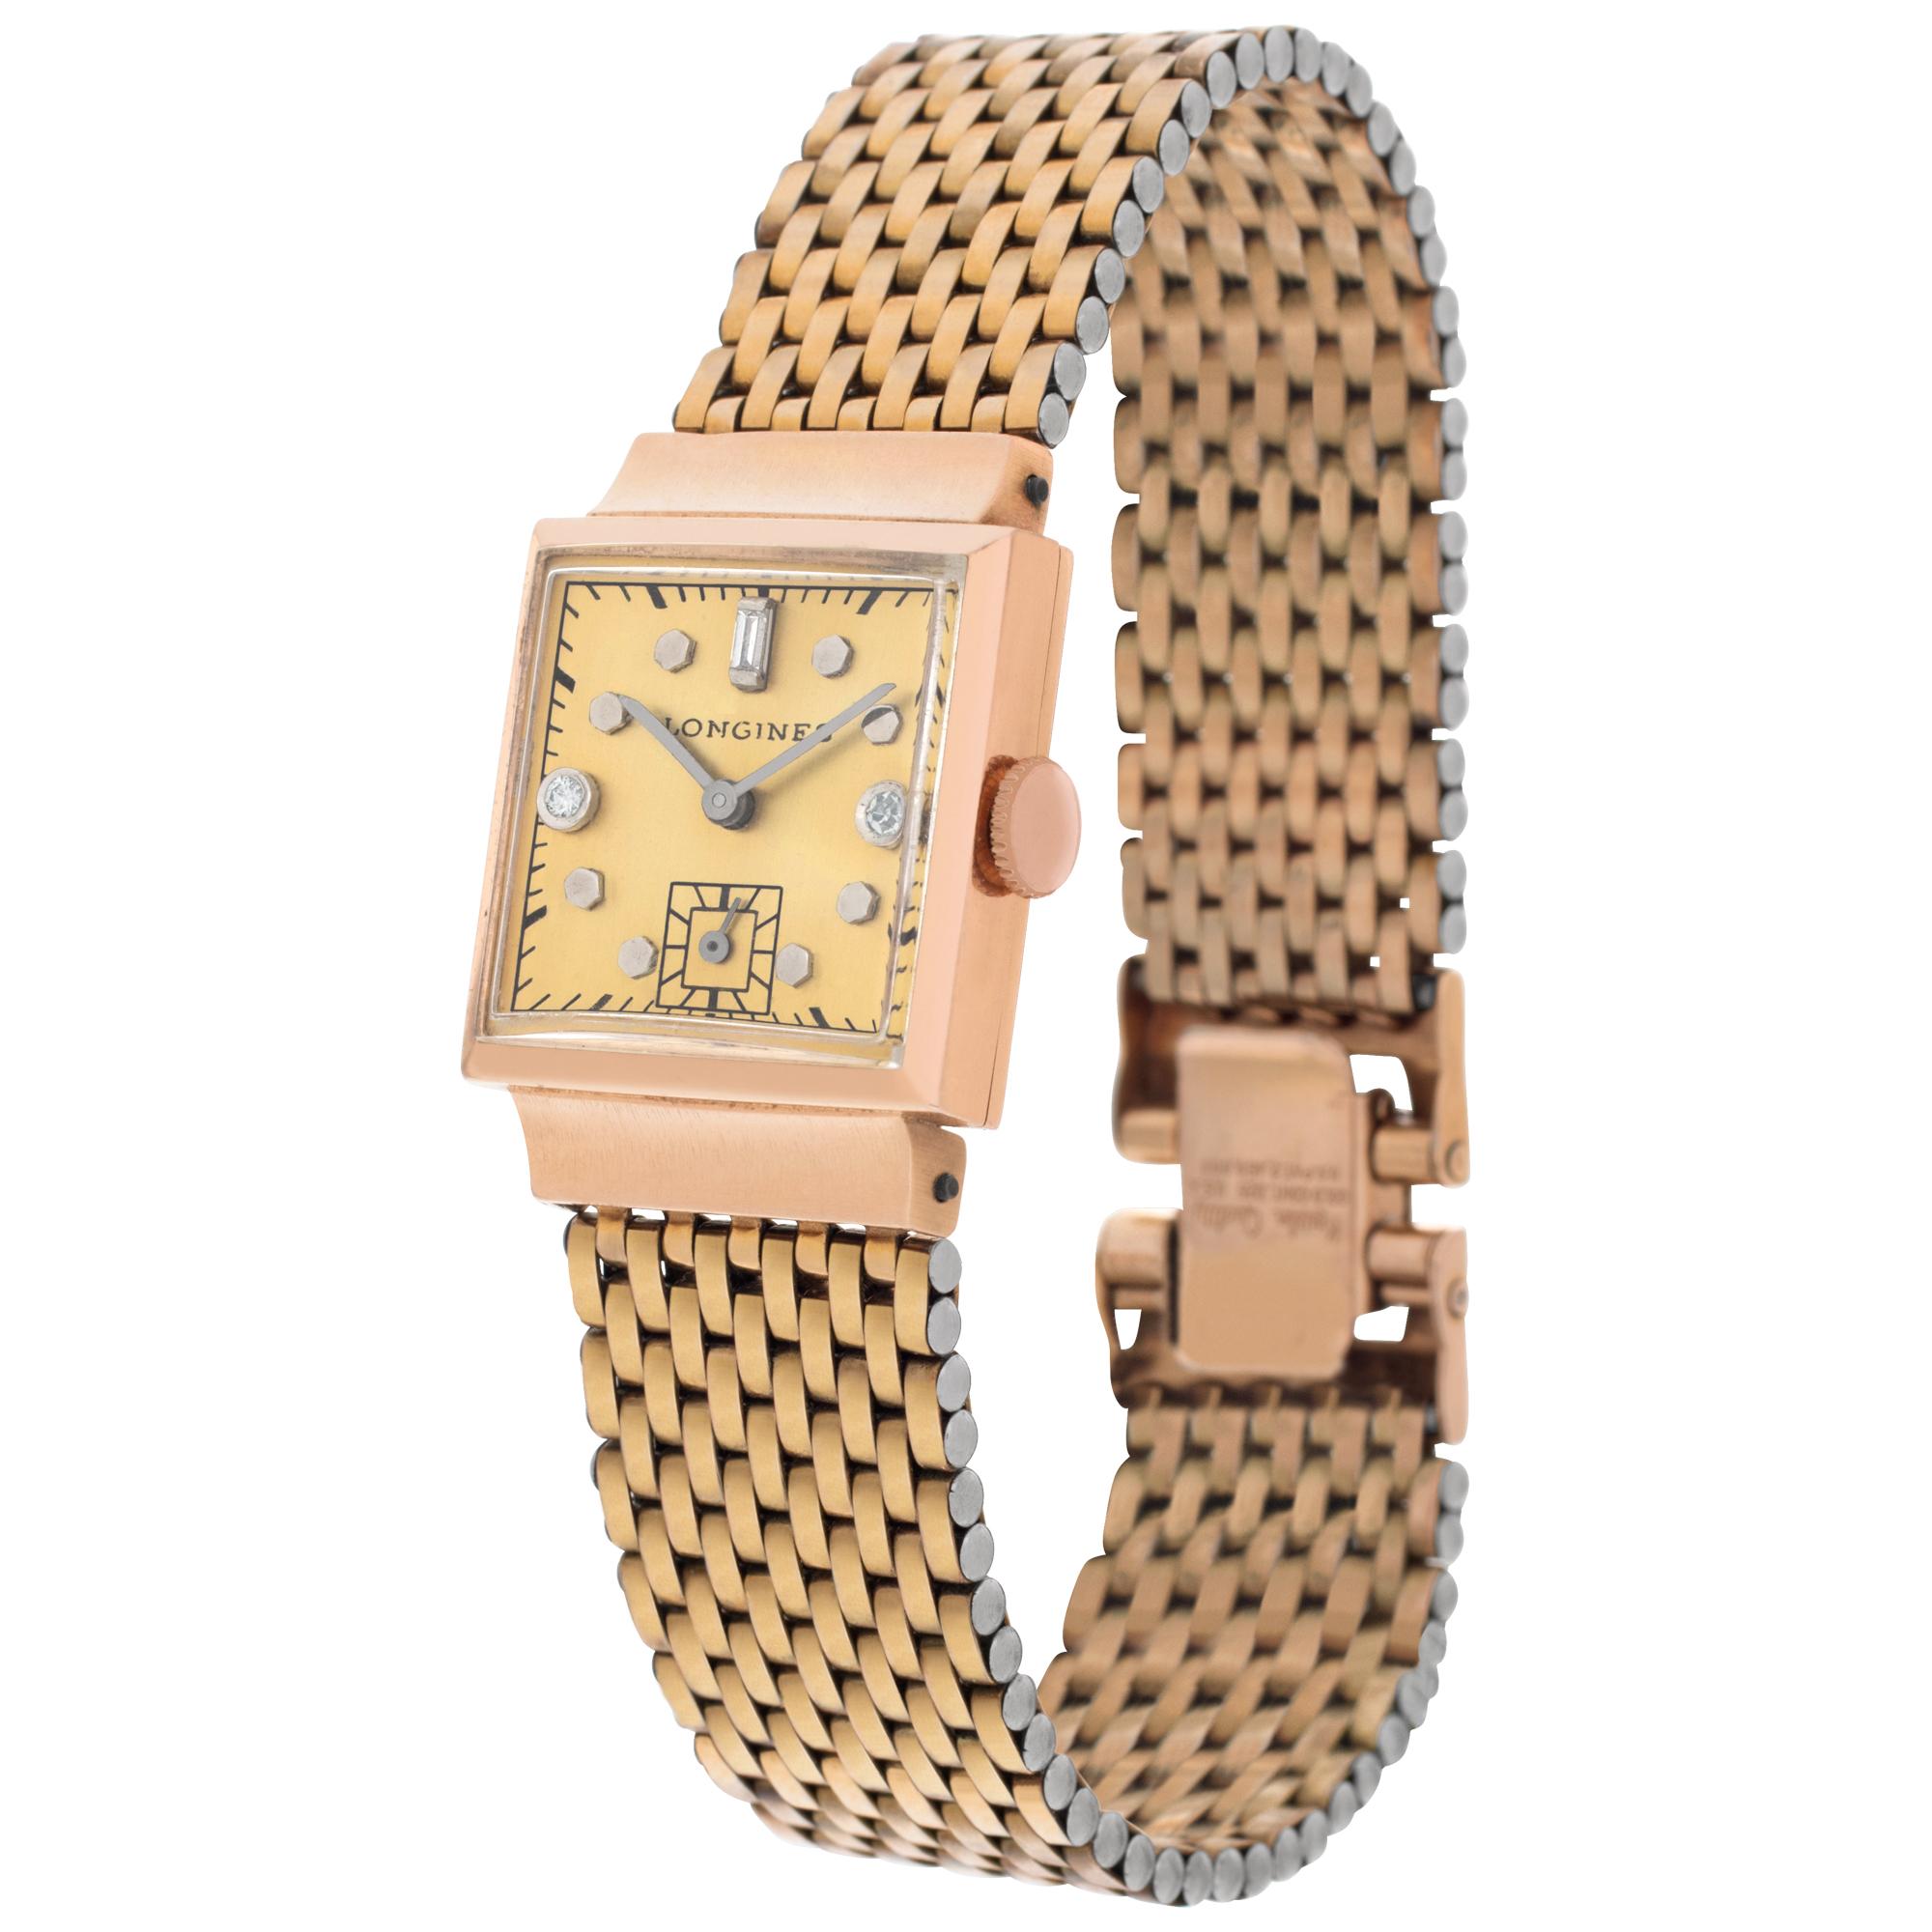 Longines Classic in 14k pink gold on gold plate band. Manual w/ subseconds. Fits 6.50 inches wrist. 22 mm case size. Ref 195611. Circa 1960-1970s. Fine Pre-owned Longines Watch.

Certified preowned Vintage Longines Classic watch is made out of rose